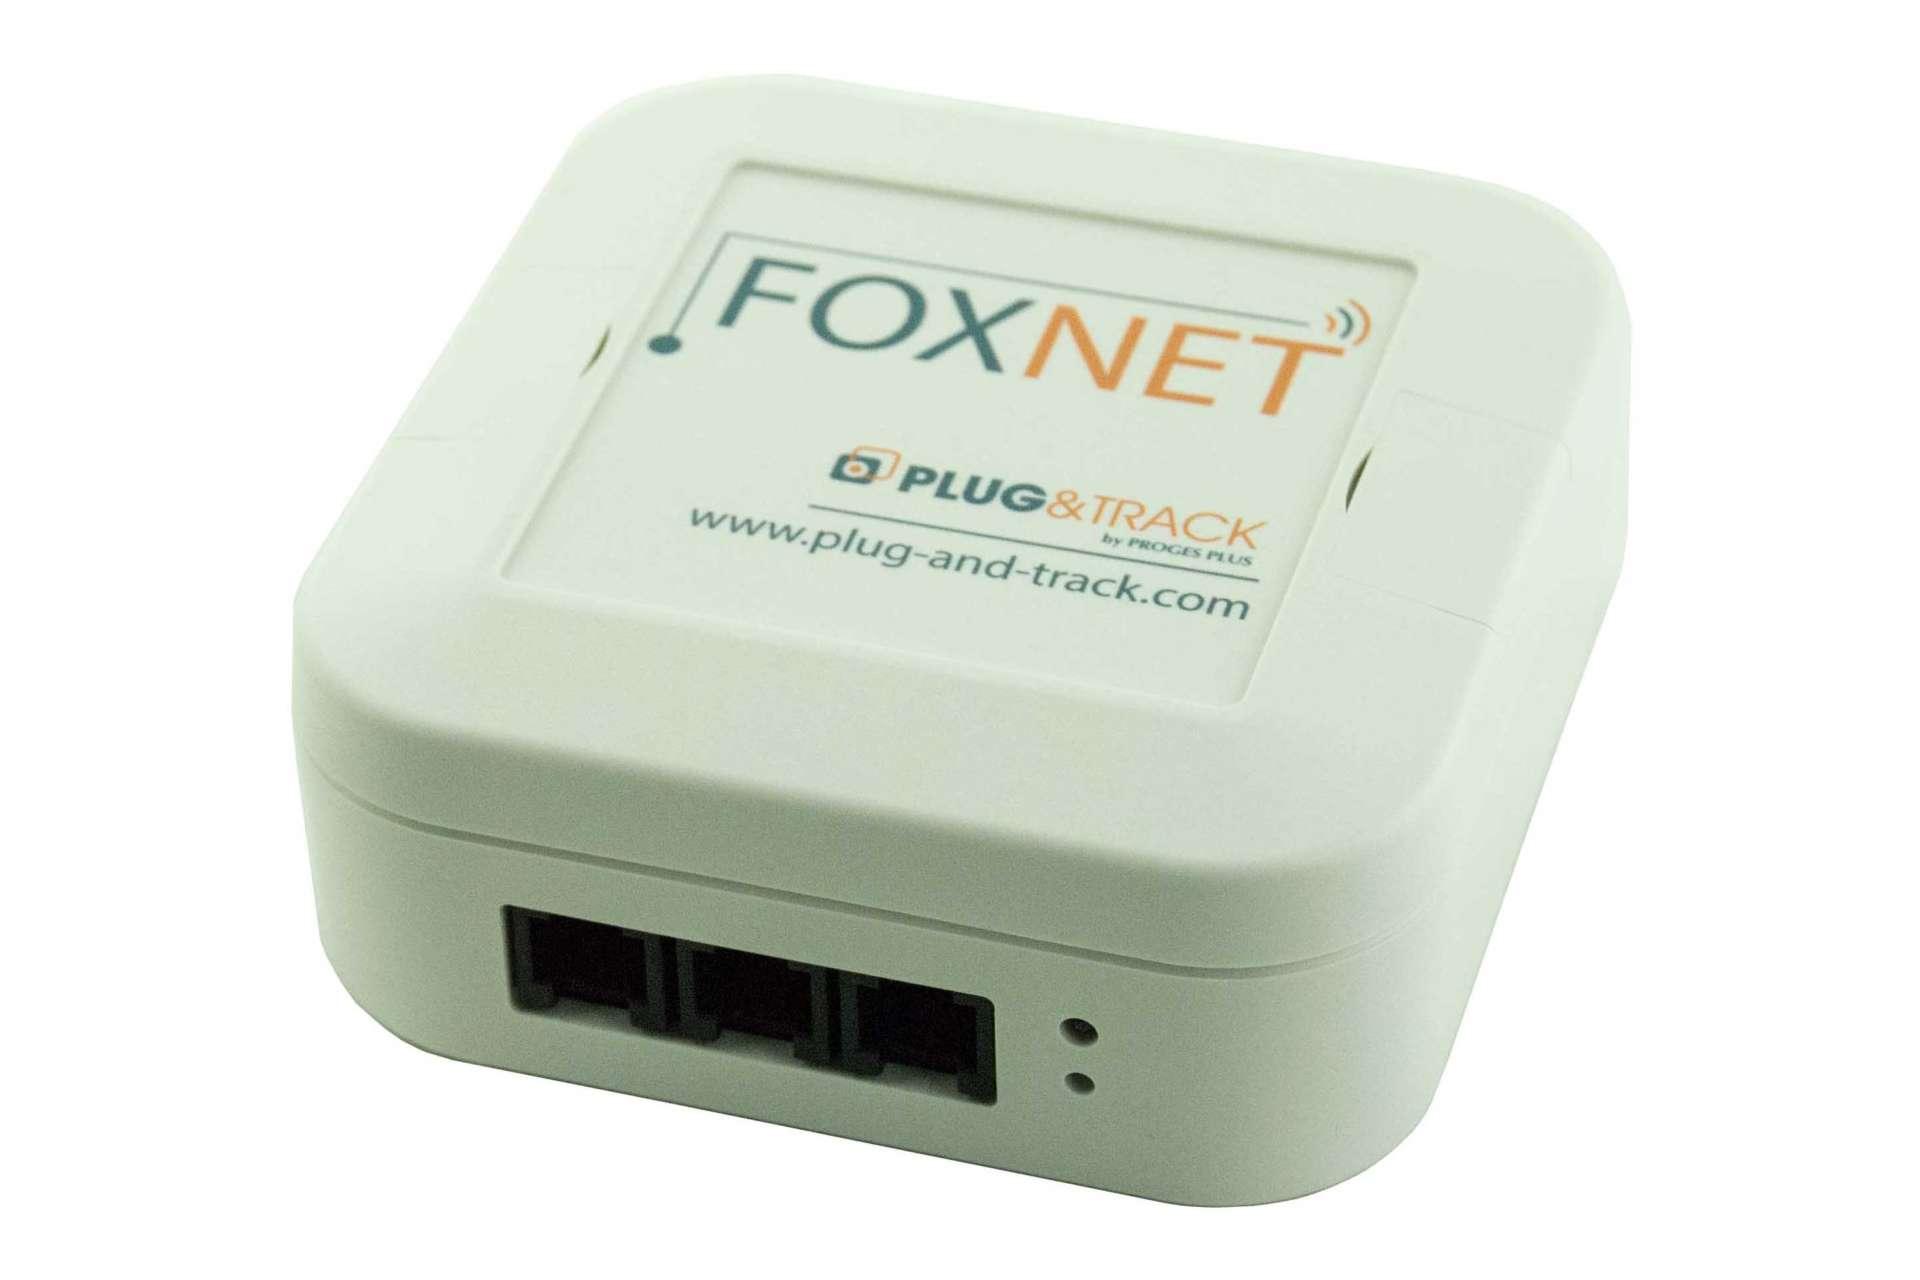 Product: FoxNet Wireless Temperature and Humidity Logger - Prime Pharma